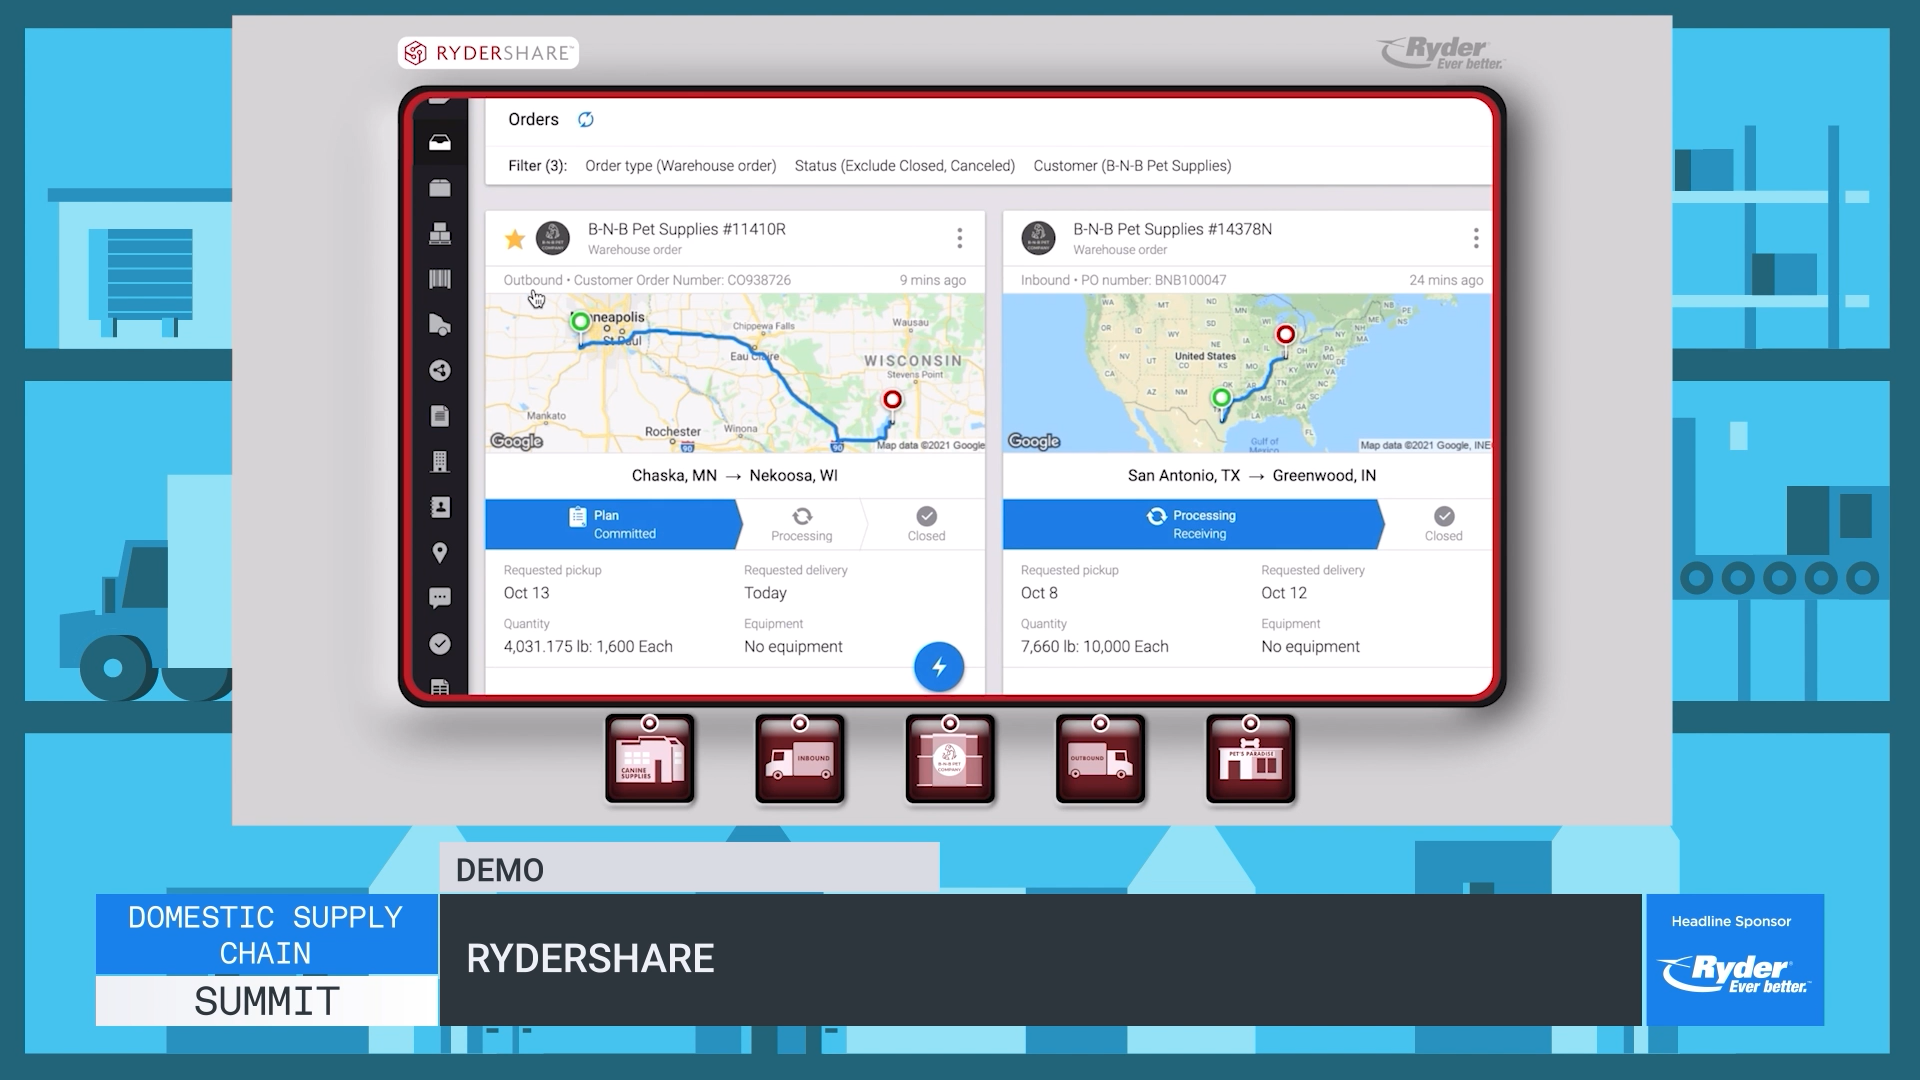 Ryder and Blume Global demo their FreightTech during FreightWaves' Domestic Supply Chain Summit.